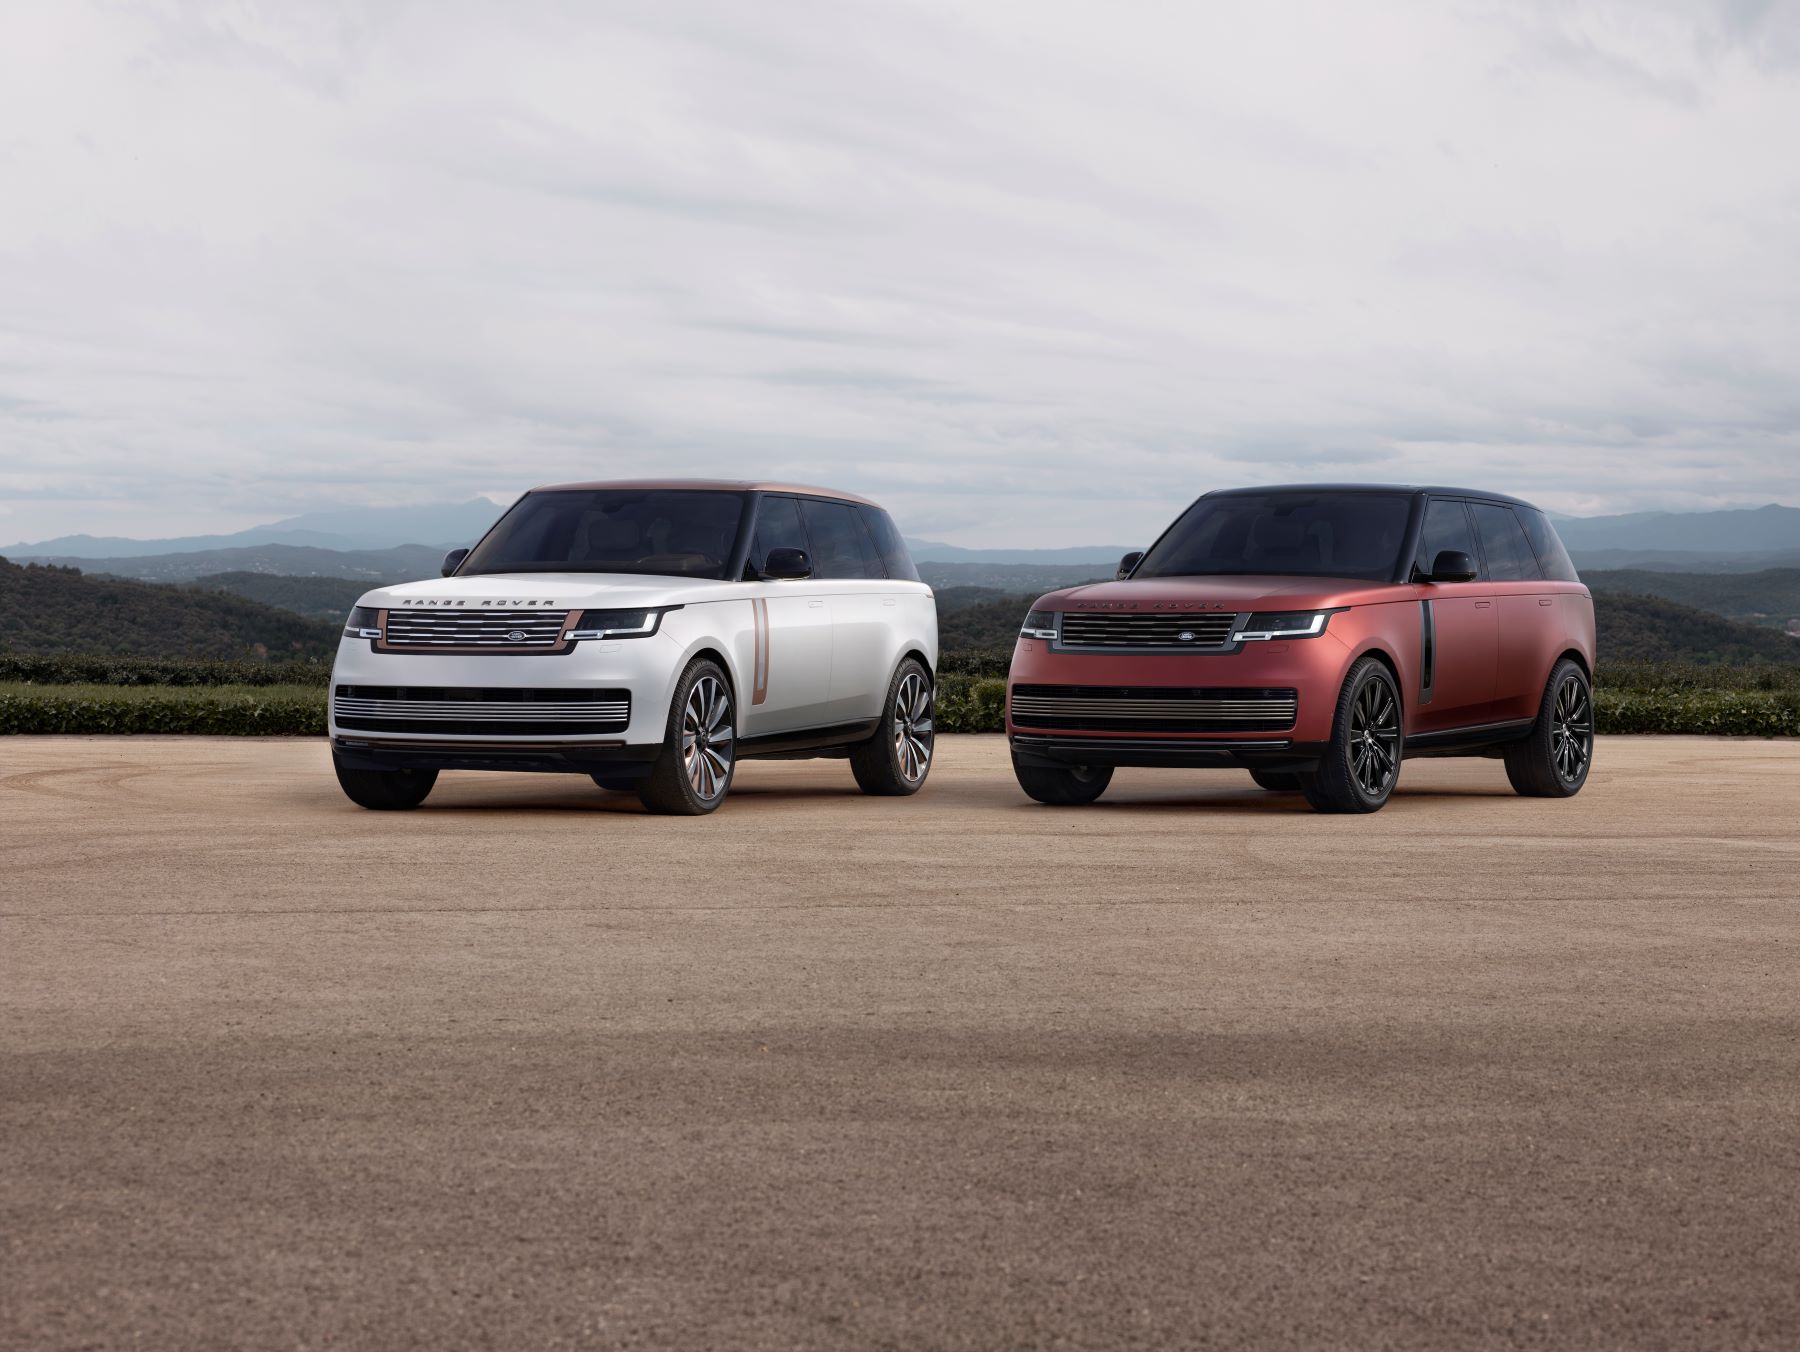 New 2022 Land Rover Range Rover SV models in white and red paint color options